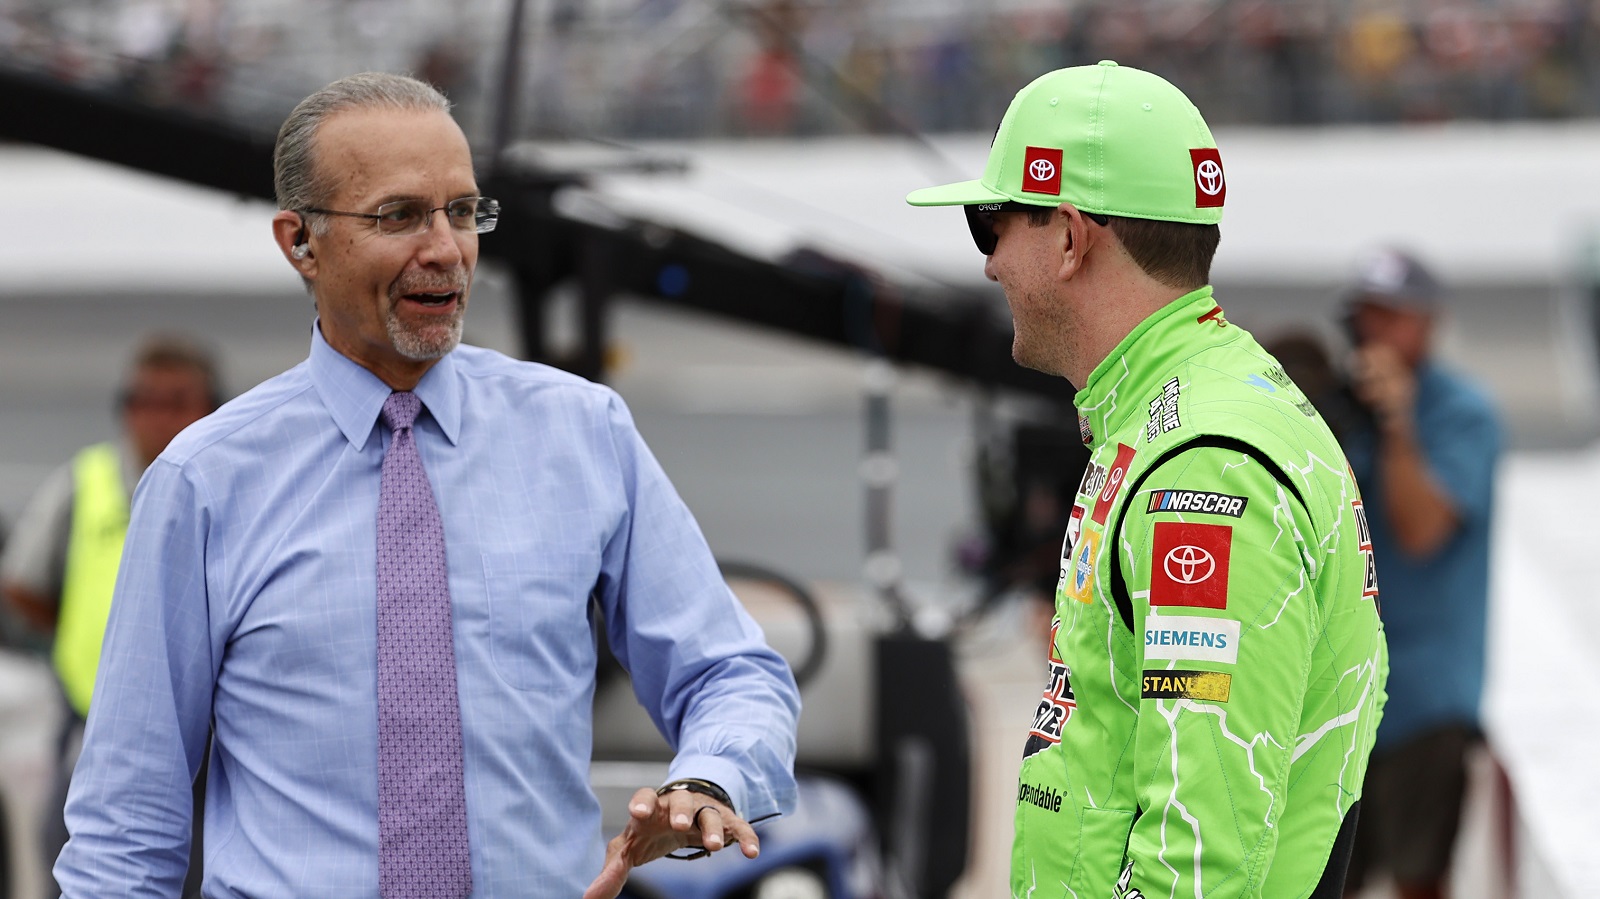 Kyle Petty talks to Joe Gibbs Racing driver Kyle Busch before the Foxwoods Resort Casino 301 on July 18, 2021, at New Hampshire Motor Speedway. | Fred Kfoury III/Icon Sportswire via Getty Images